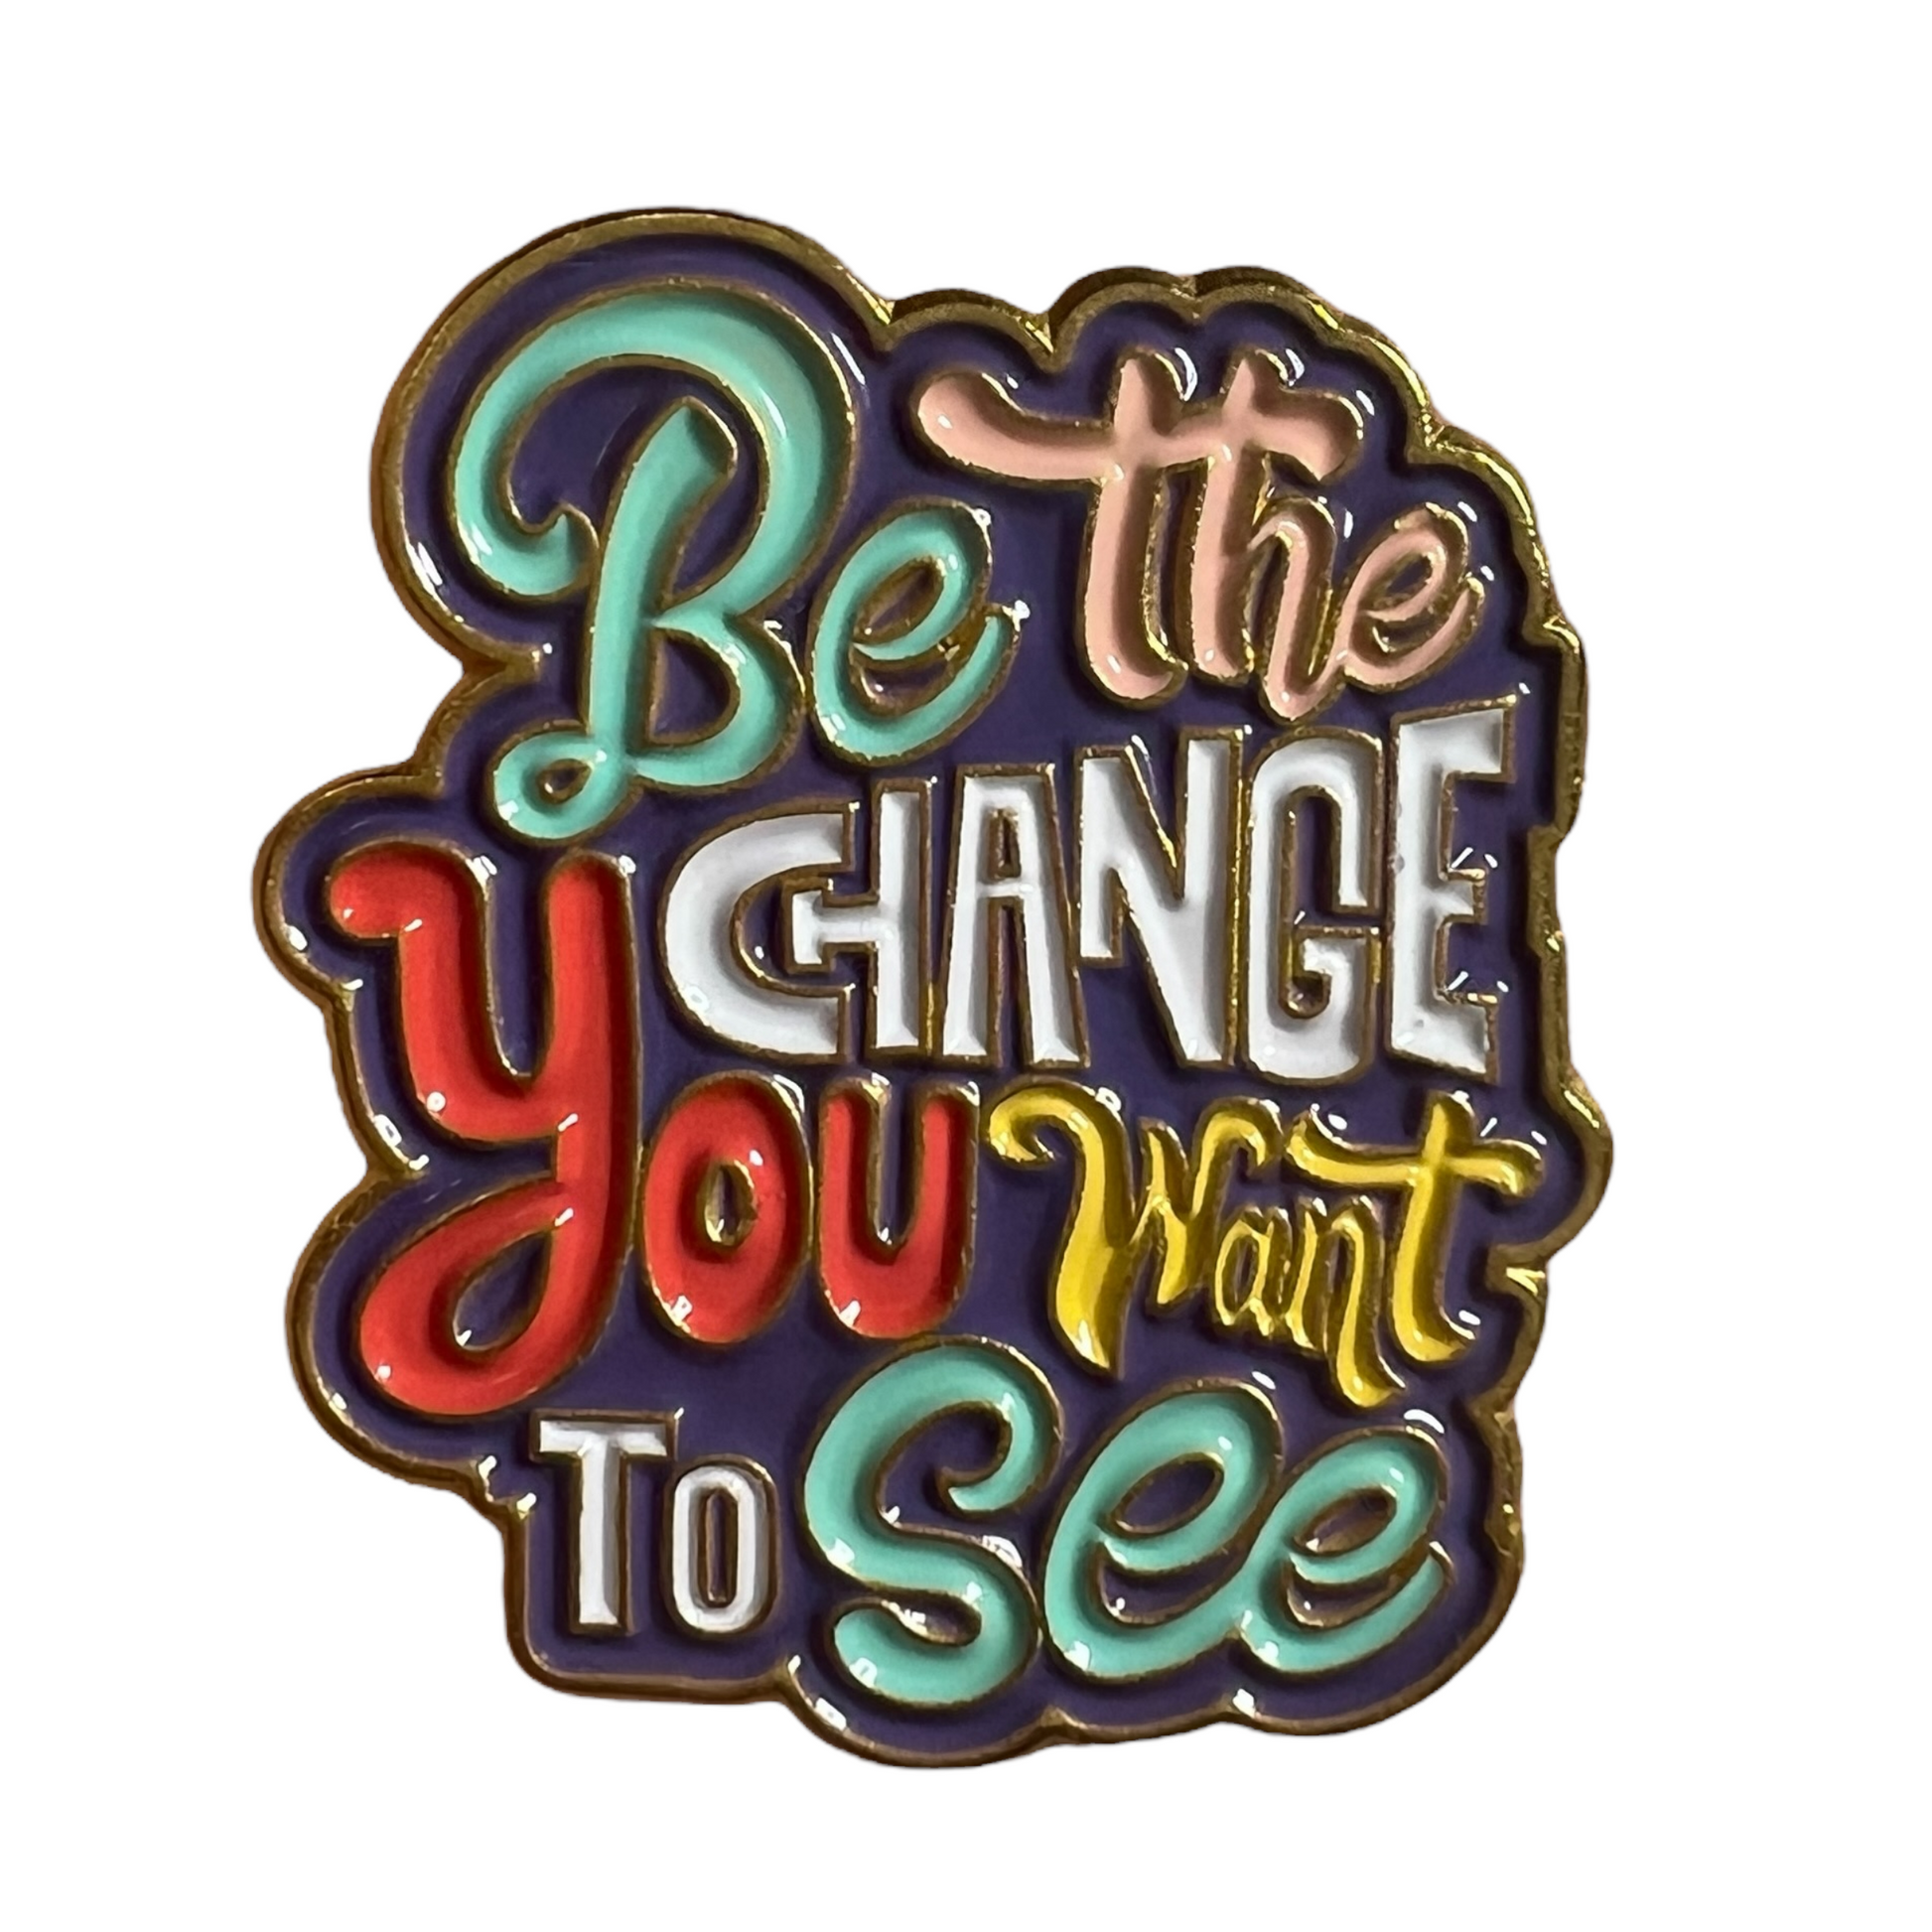 Pin — 'Be The Change You Want To See'  SPIRIT SPARKPLUGS   